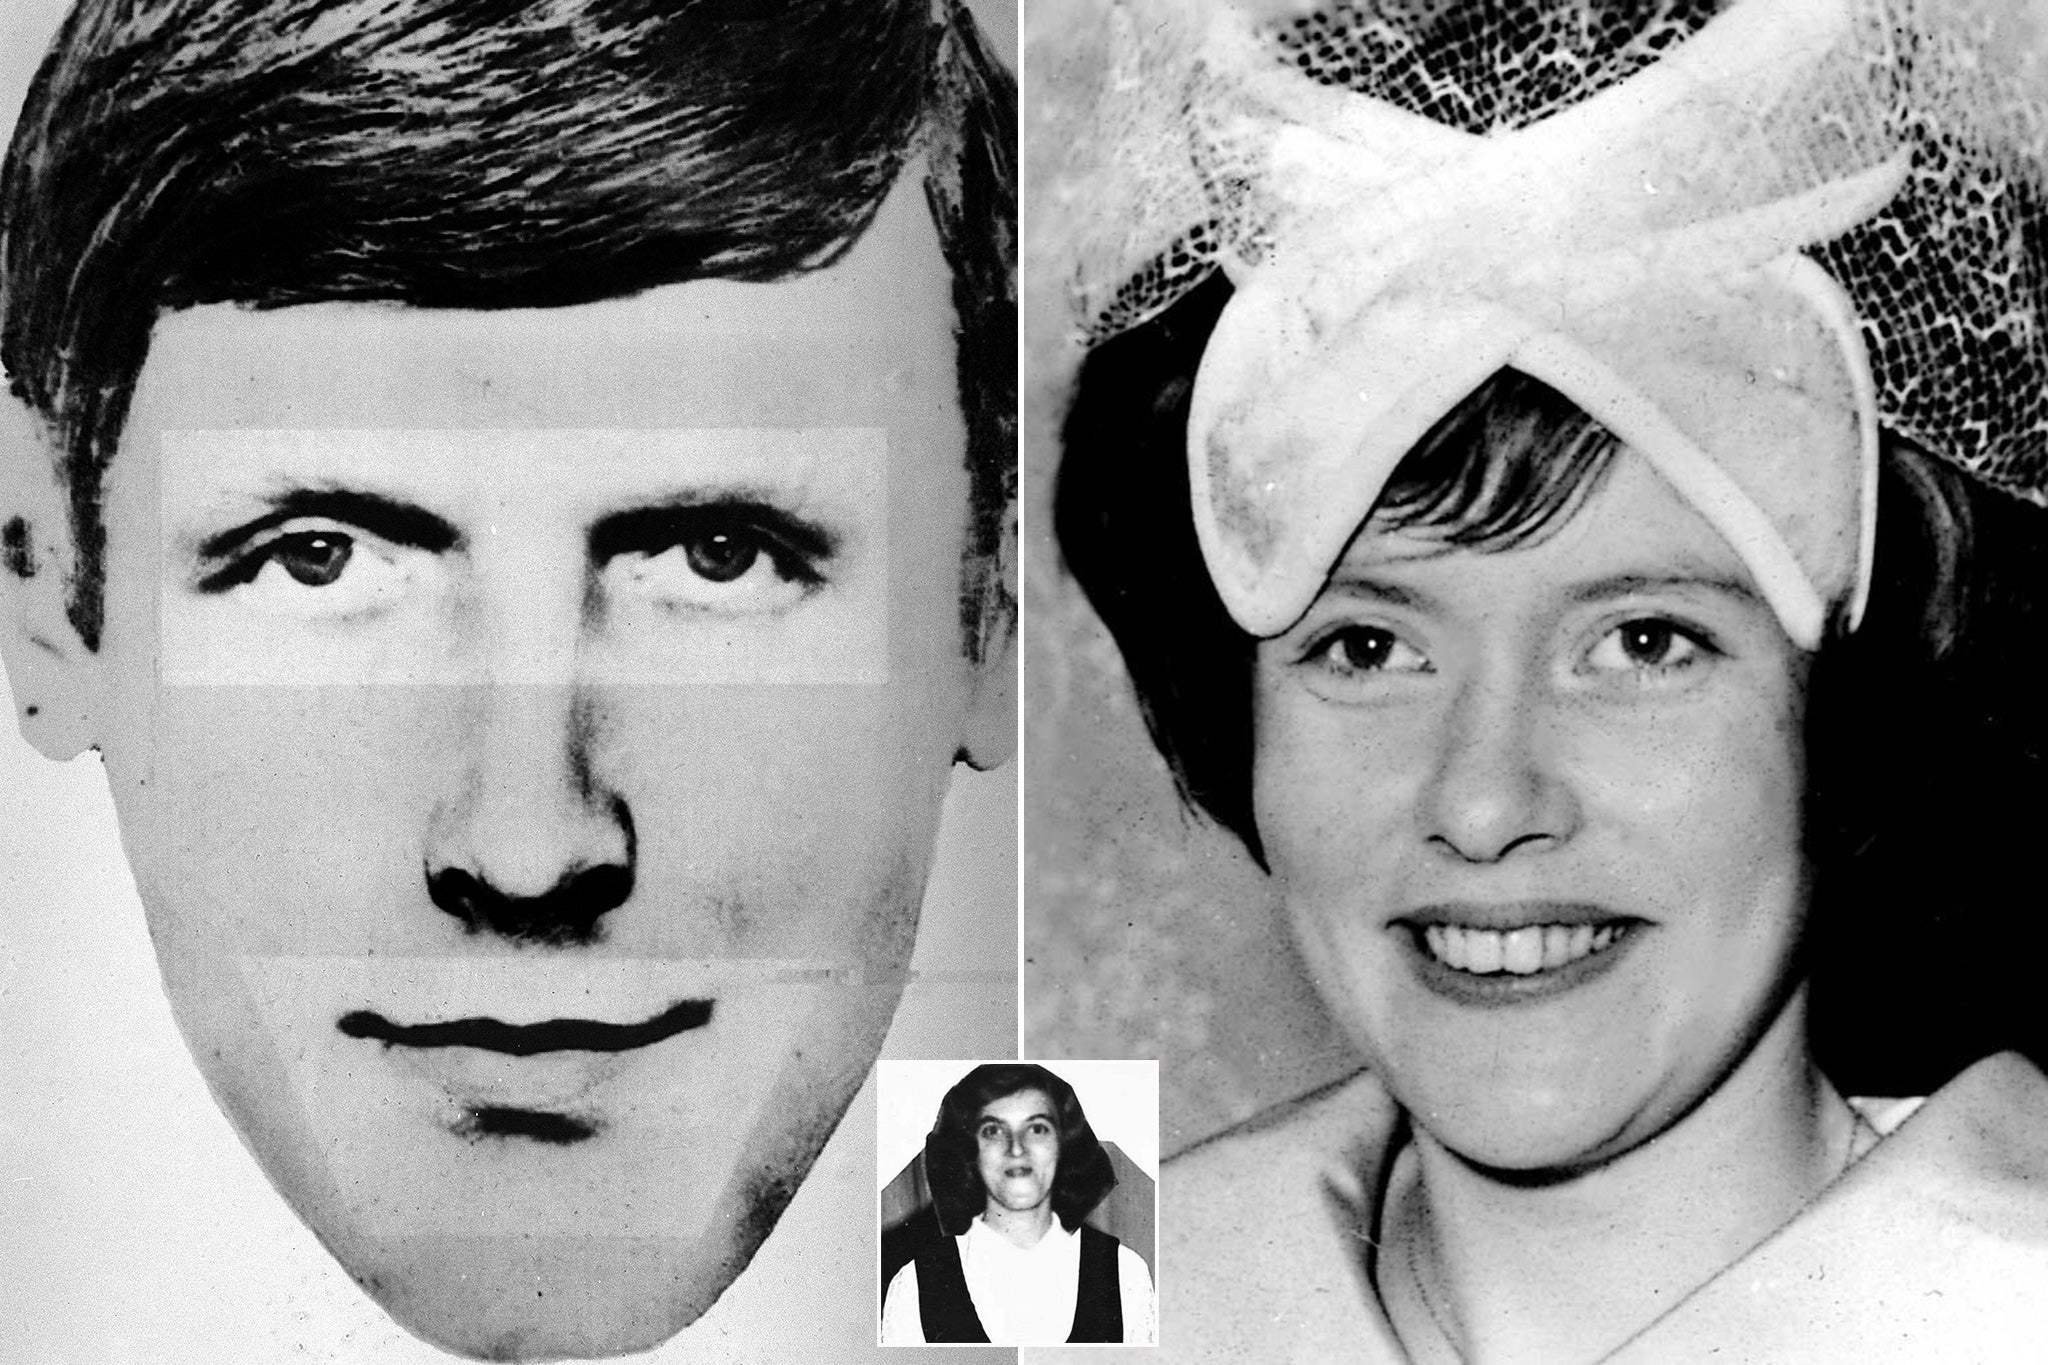 A police photofit of Bible John, left, with two of his victims, Patricia Docker, right, and Jemima McDonald, bottom